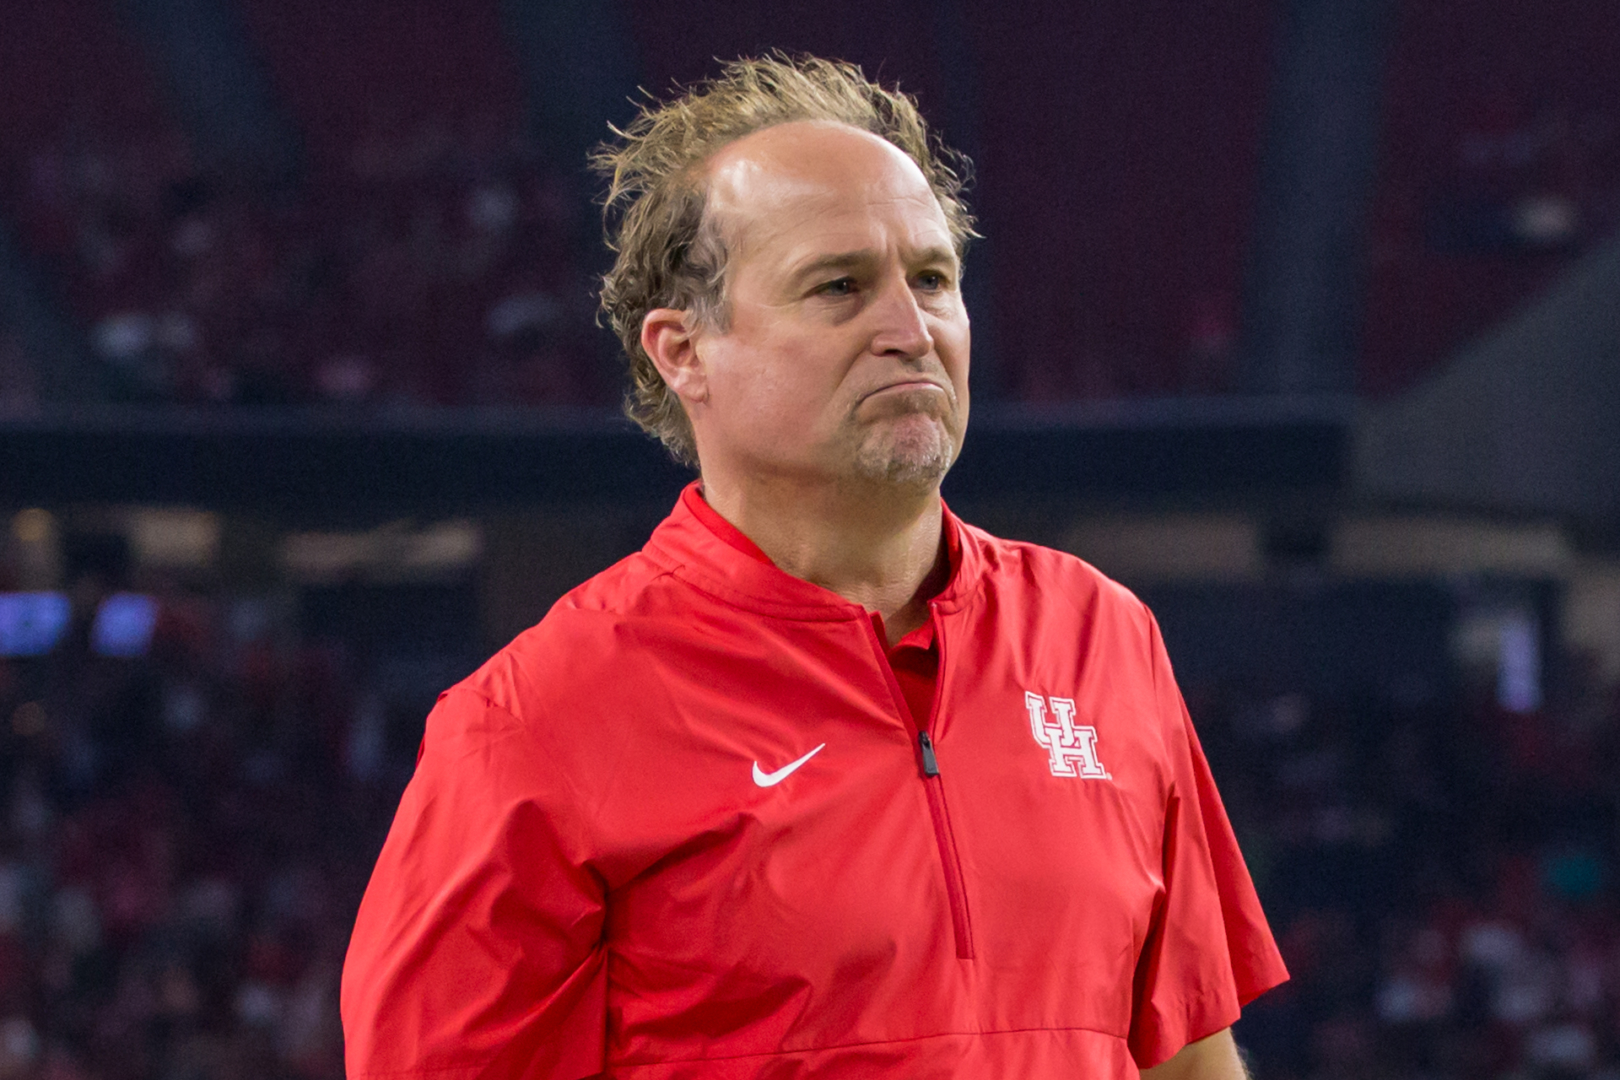 Head coach Dana Holgorsen, who was hired at Houston in Januar, owes tens of thousands of dollars in rent and fees for cleaning and repairs according to a lawsuit filed in West Virginia court. | Trevor Nolley/The Cougar